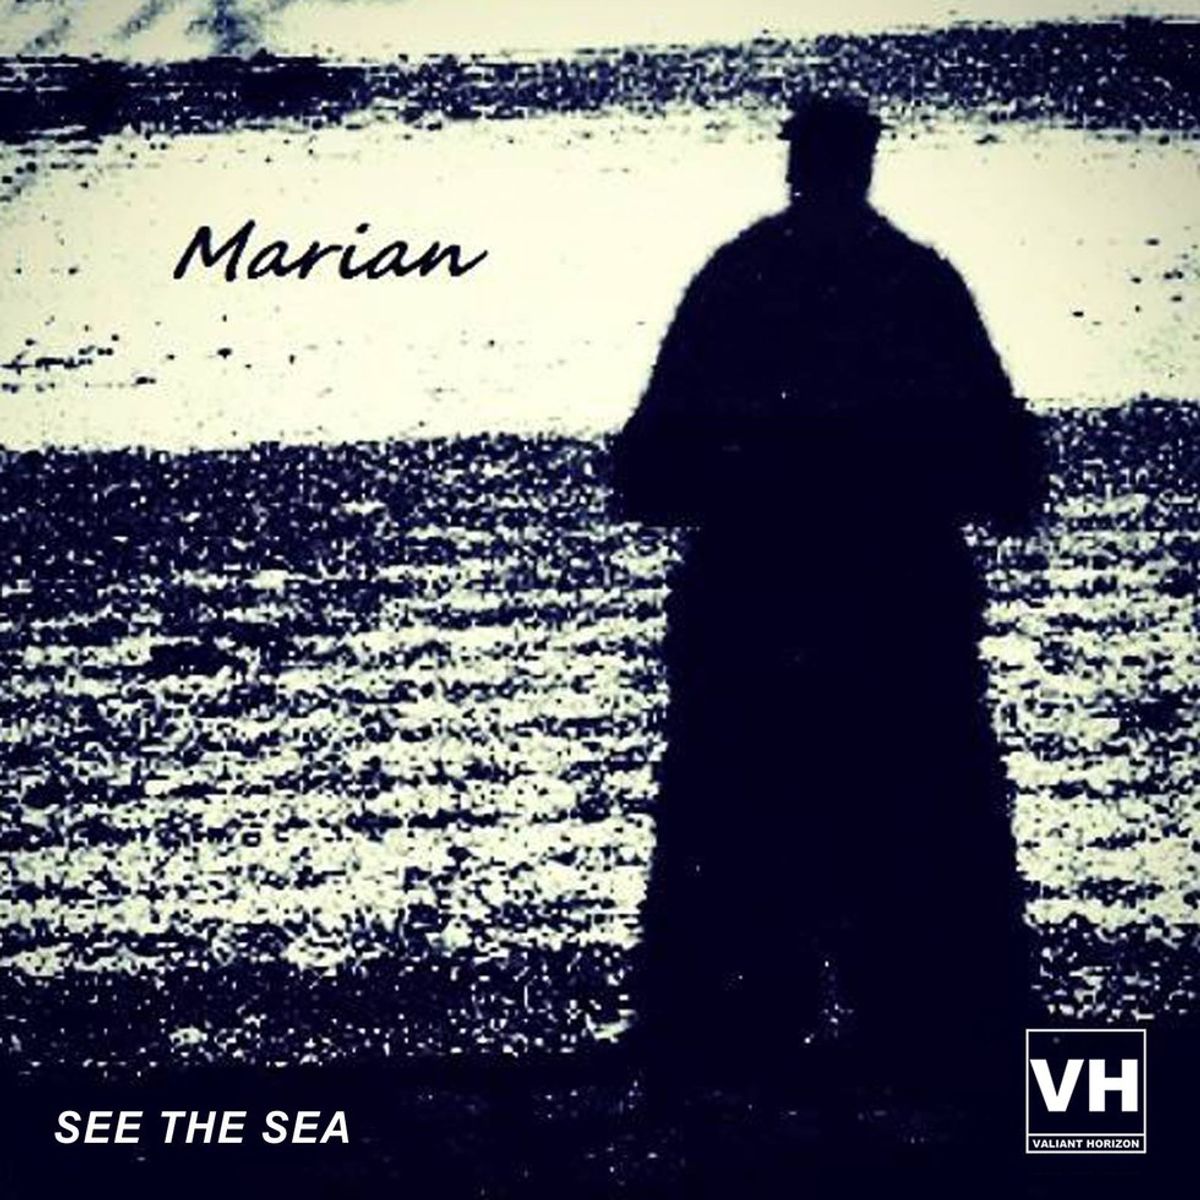 German Electronica Artist Marian Soars On Techno-infused “See the Sea” EP